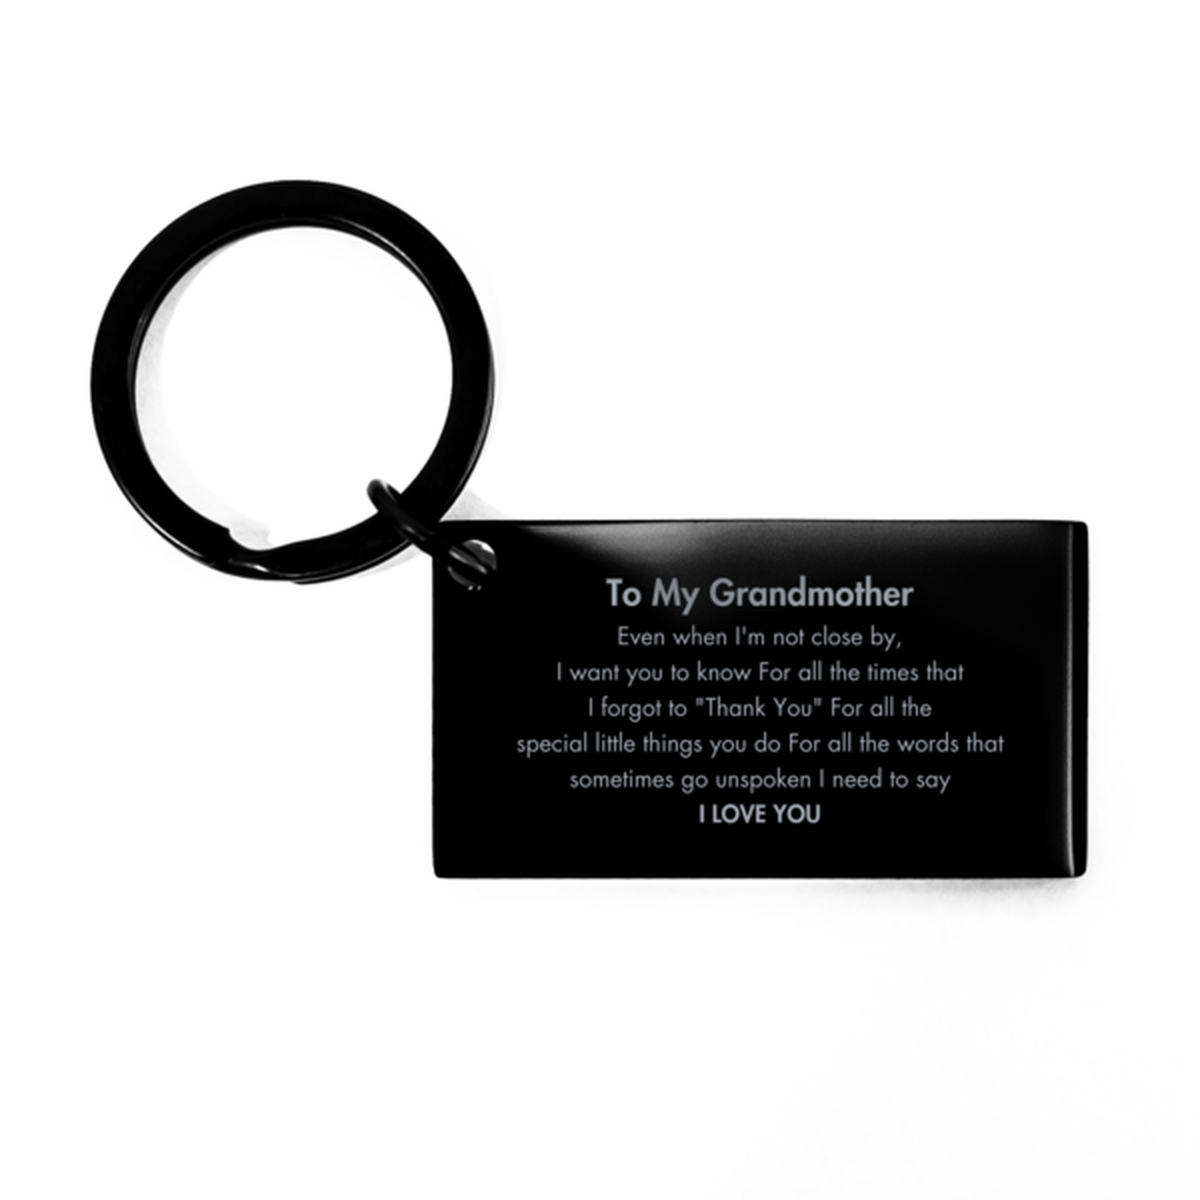 Thank You Gifts for Grandmother, Keepsake Keychain Gifts for Grandmother Birthday Mother's day Father's Day Grandmother For all the words That sometimes go unspoken I need to say I LOVE YOU